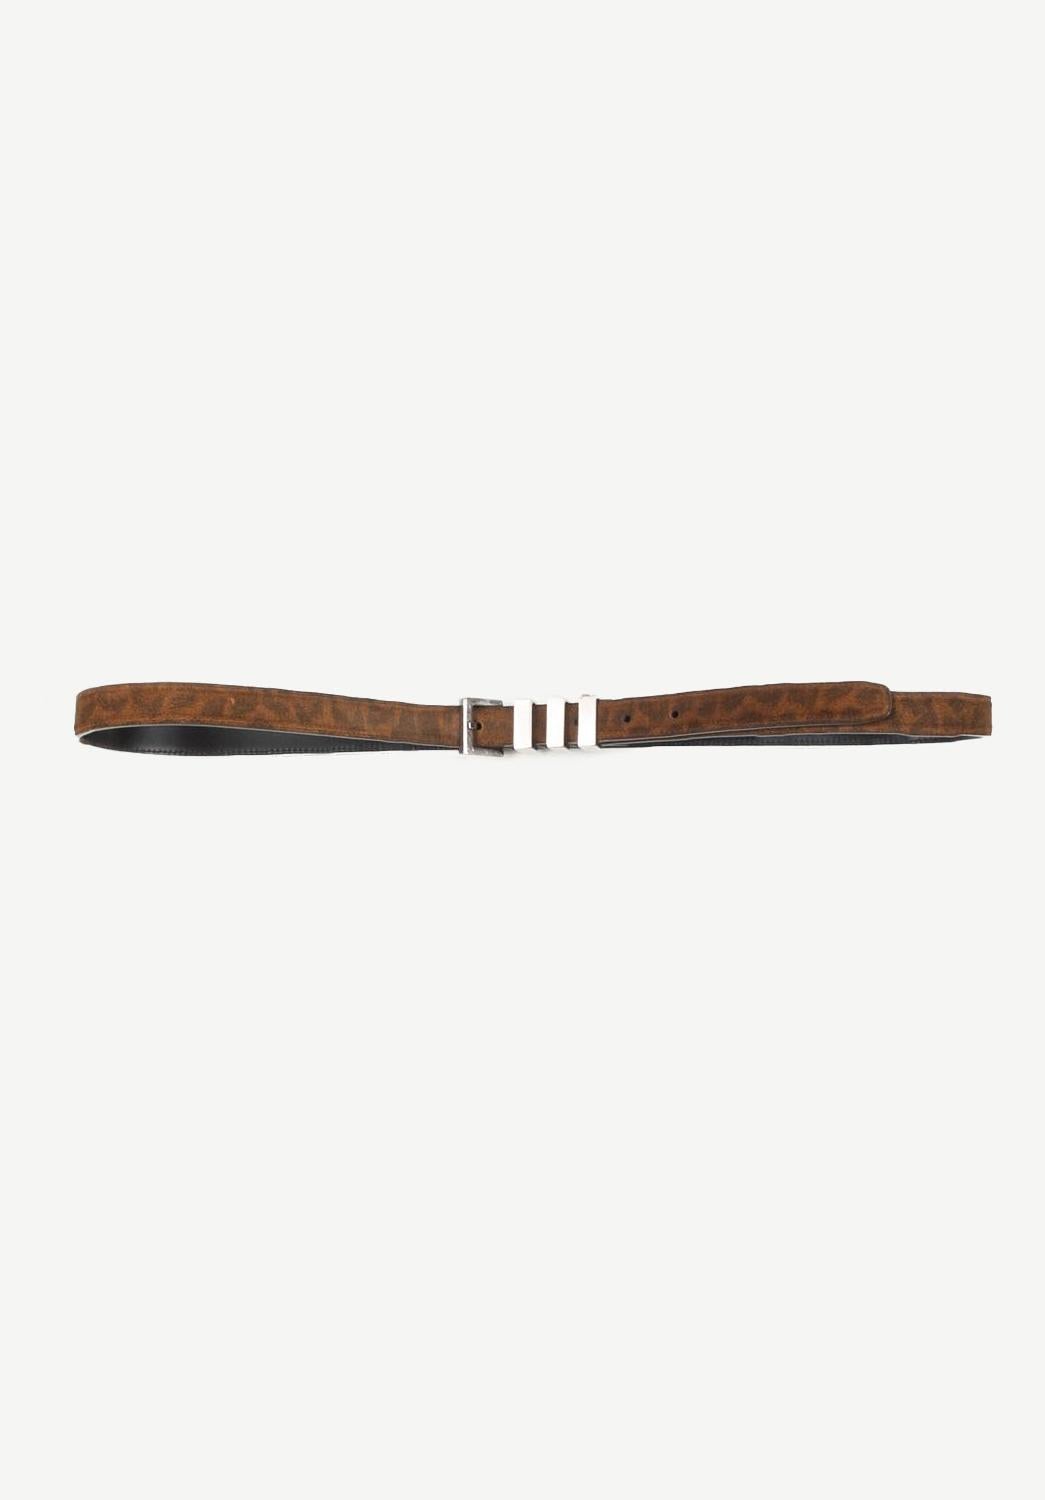 100% genuine Saint Laurent Paris 3 Peasant Belt, S630 
Color: brown
(An actual color may a bit vary due to individual computer screen interpretation)
Material: suede leather
Tag size: 100
This belt is great quality item. Rate 8.5 of 10, very good